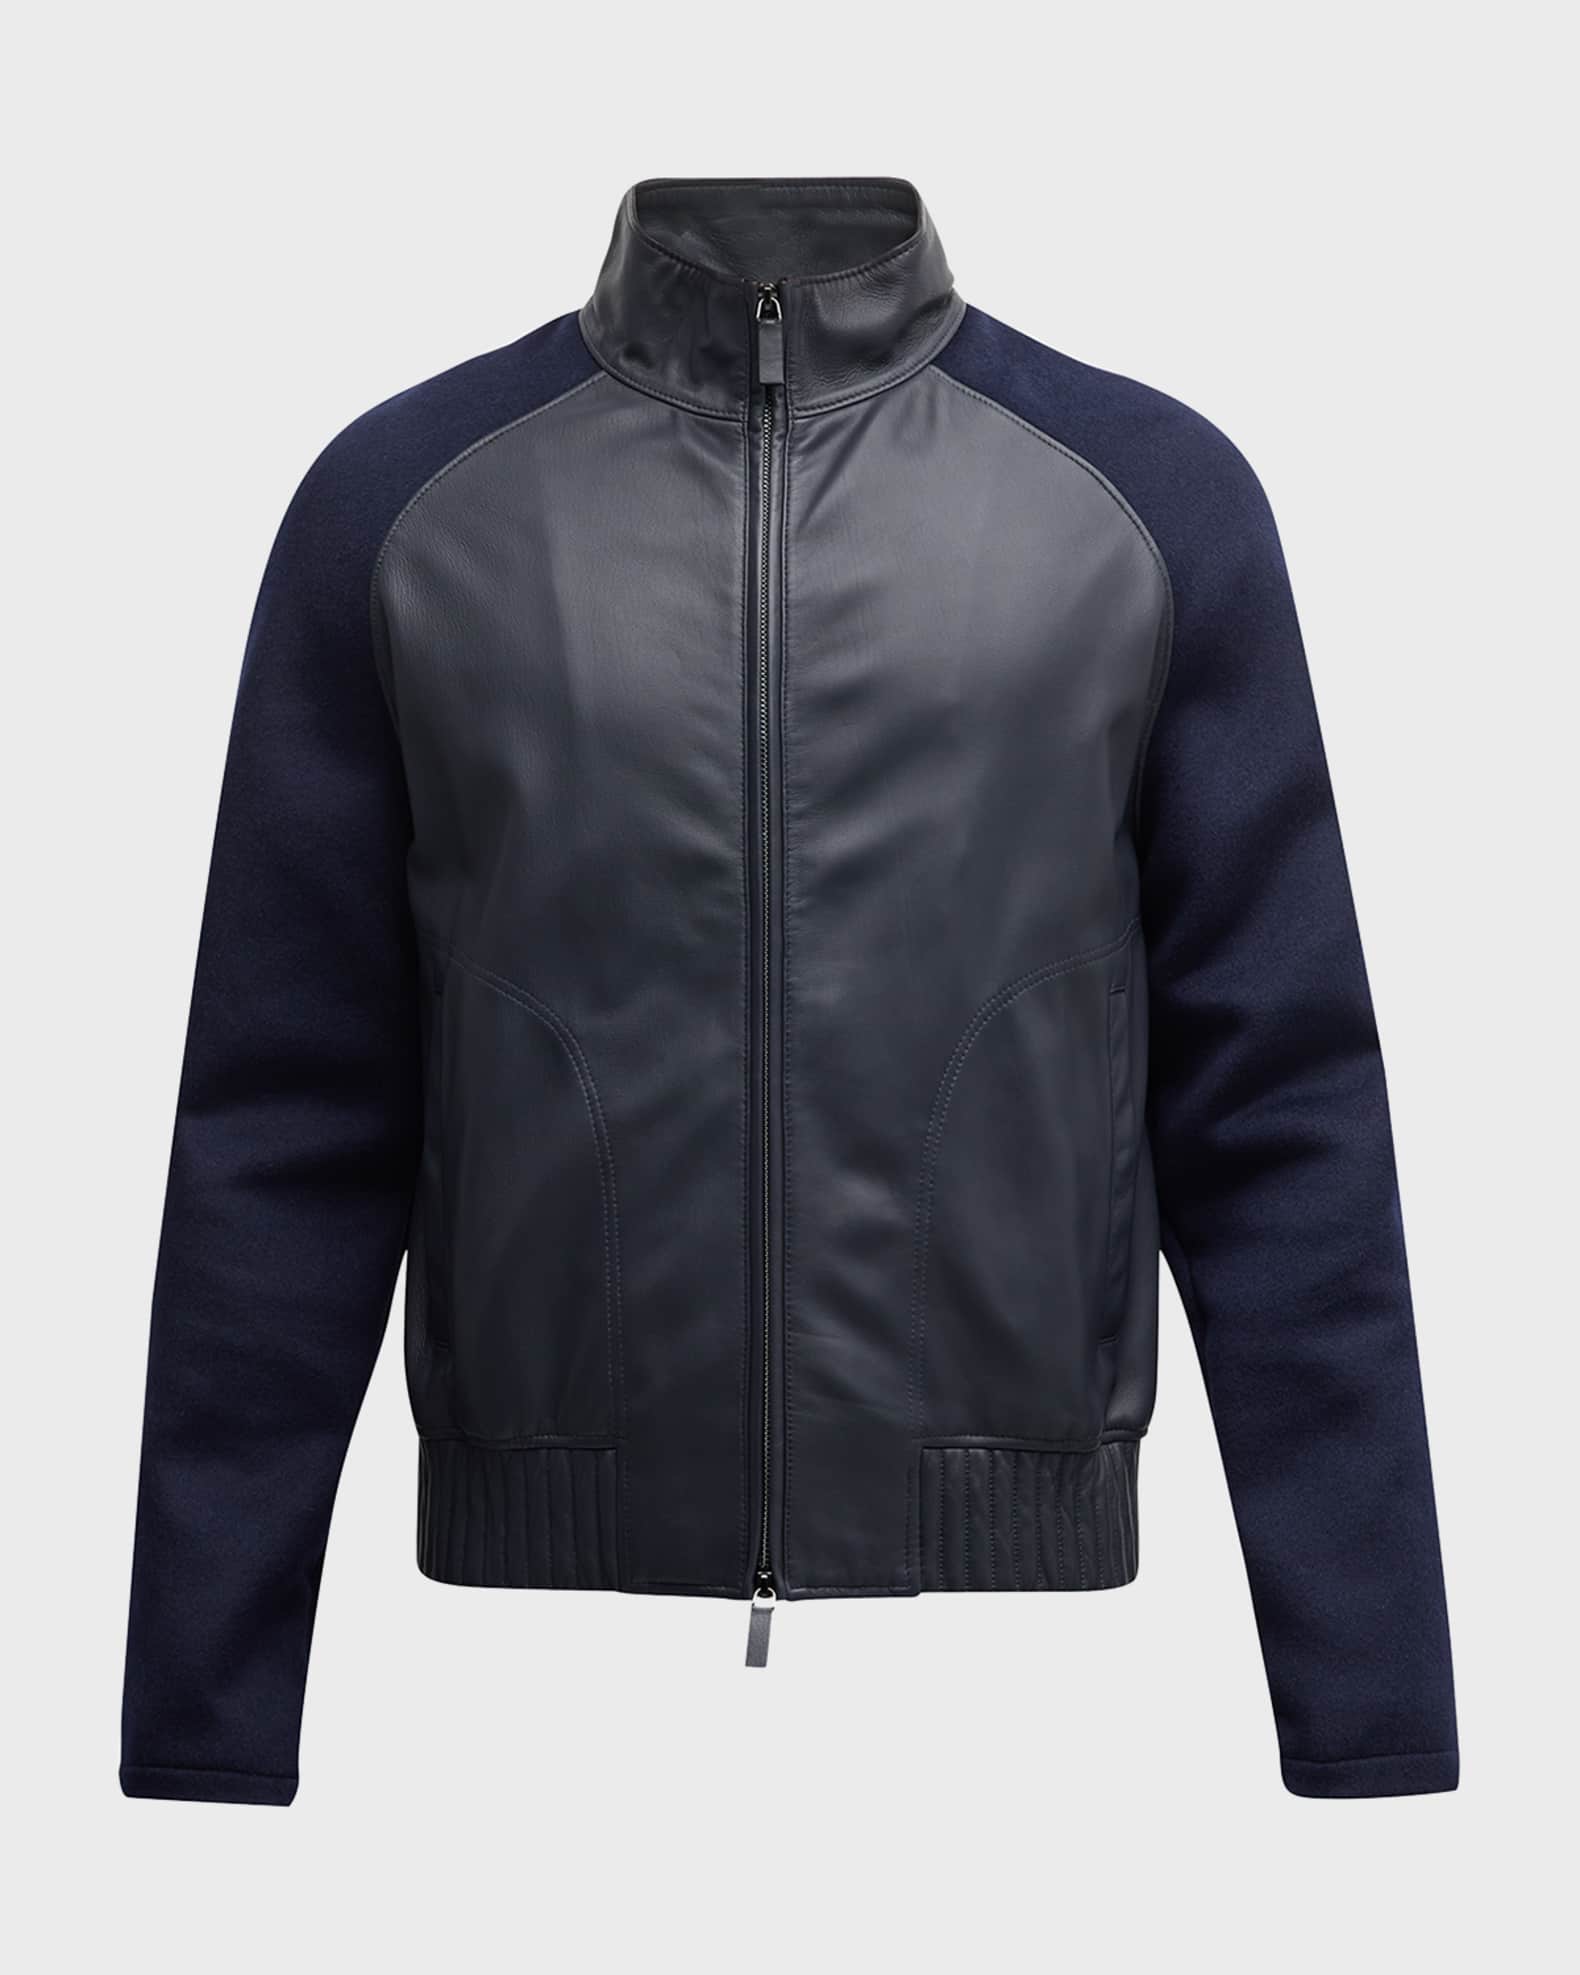 Emporio Armani Men's Leather Bomber Jacket with Knit Sleeves | Neiman ...